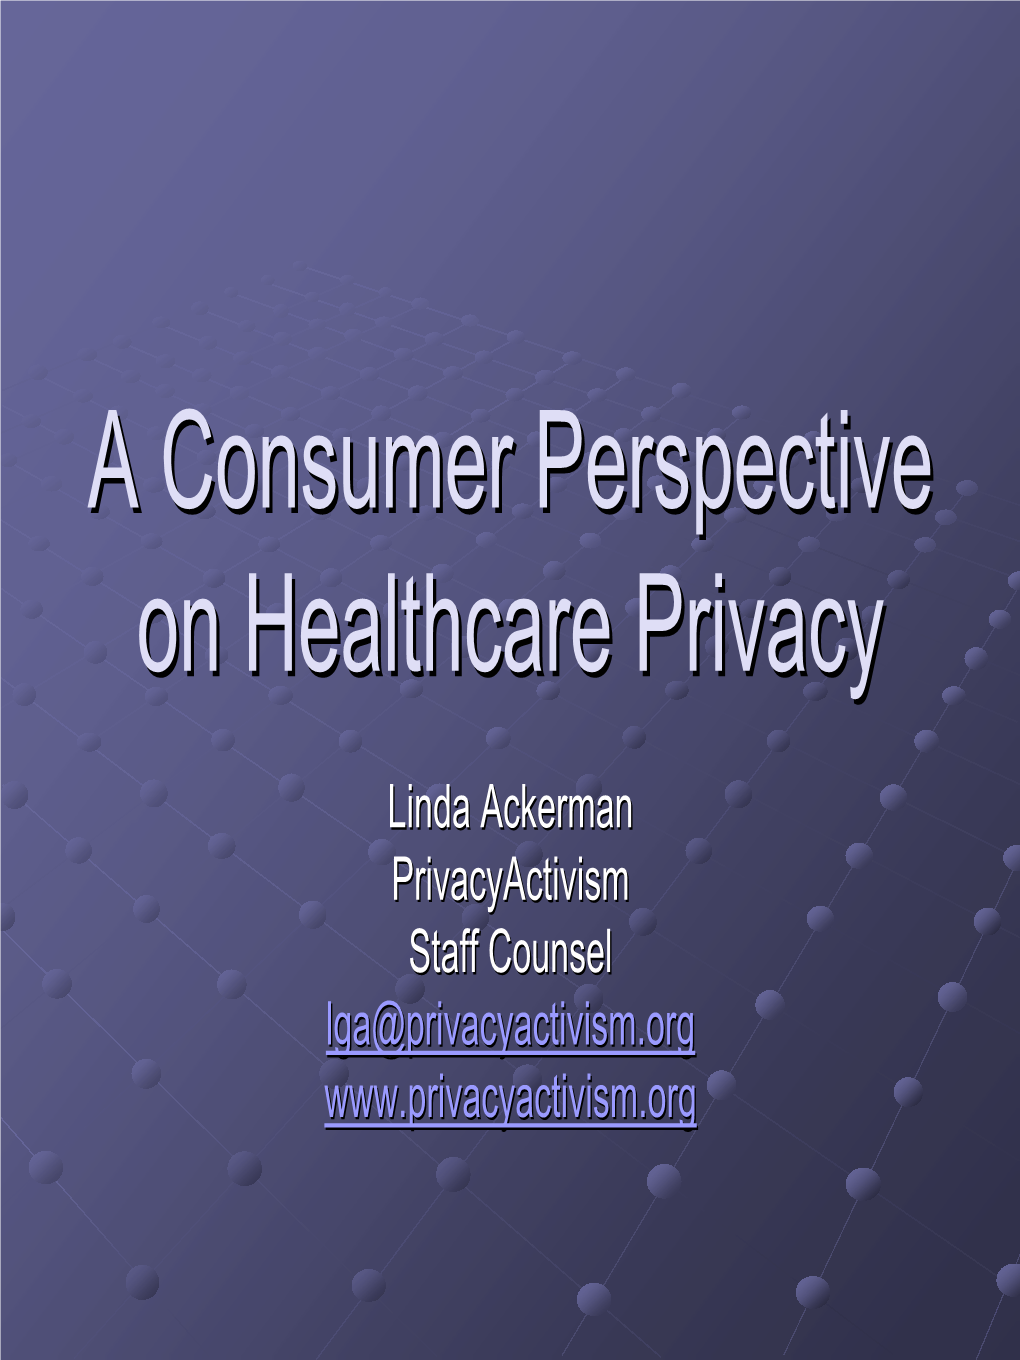 A Consumer Perspective on Health Care Privacy